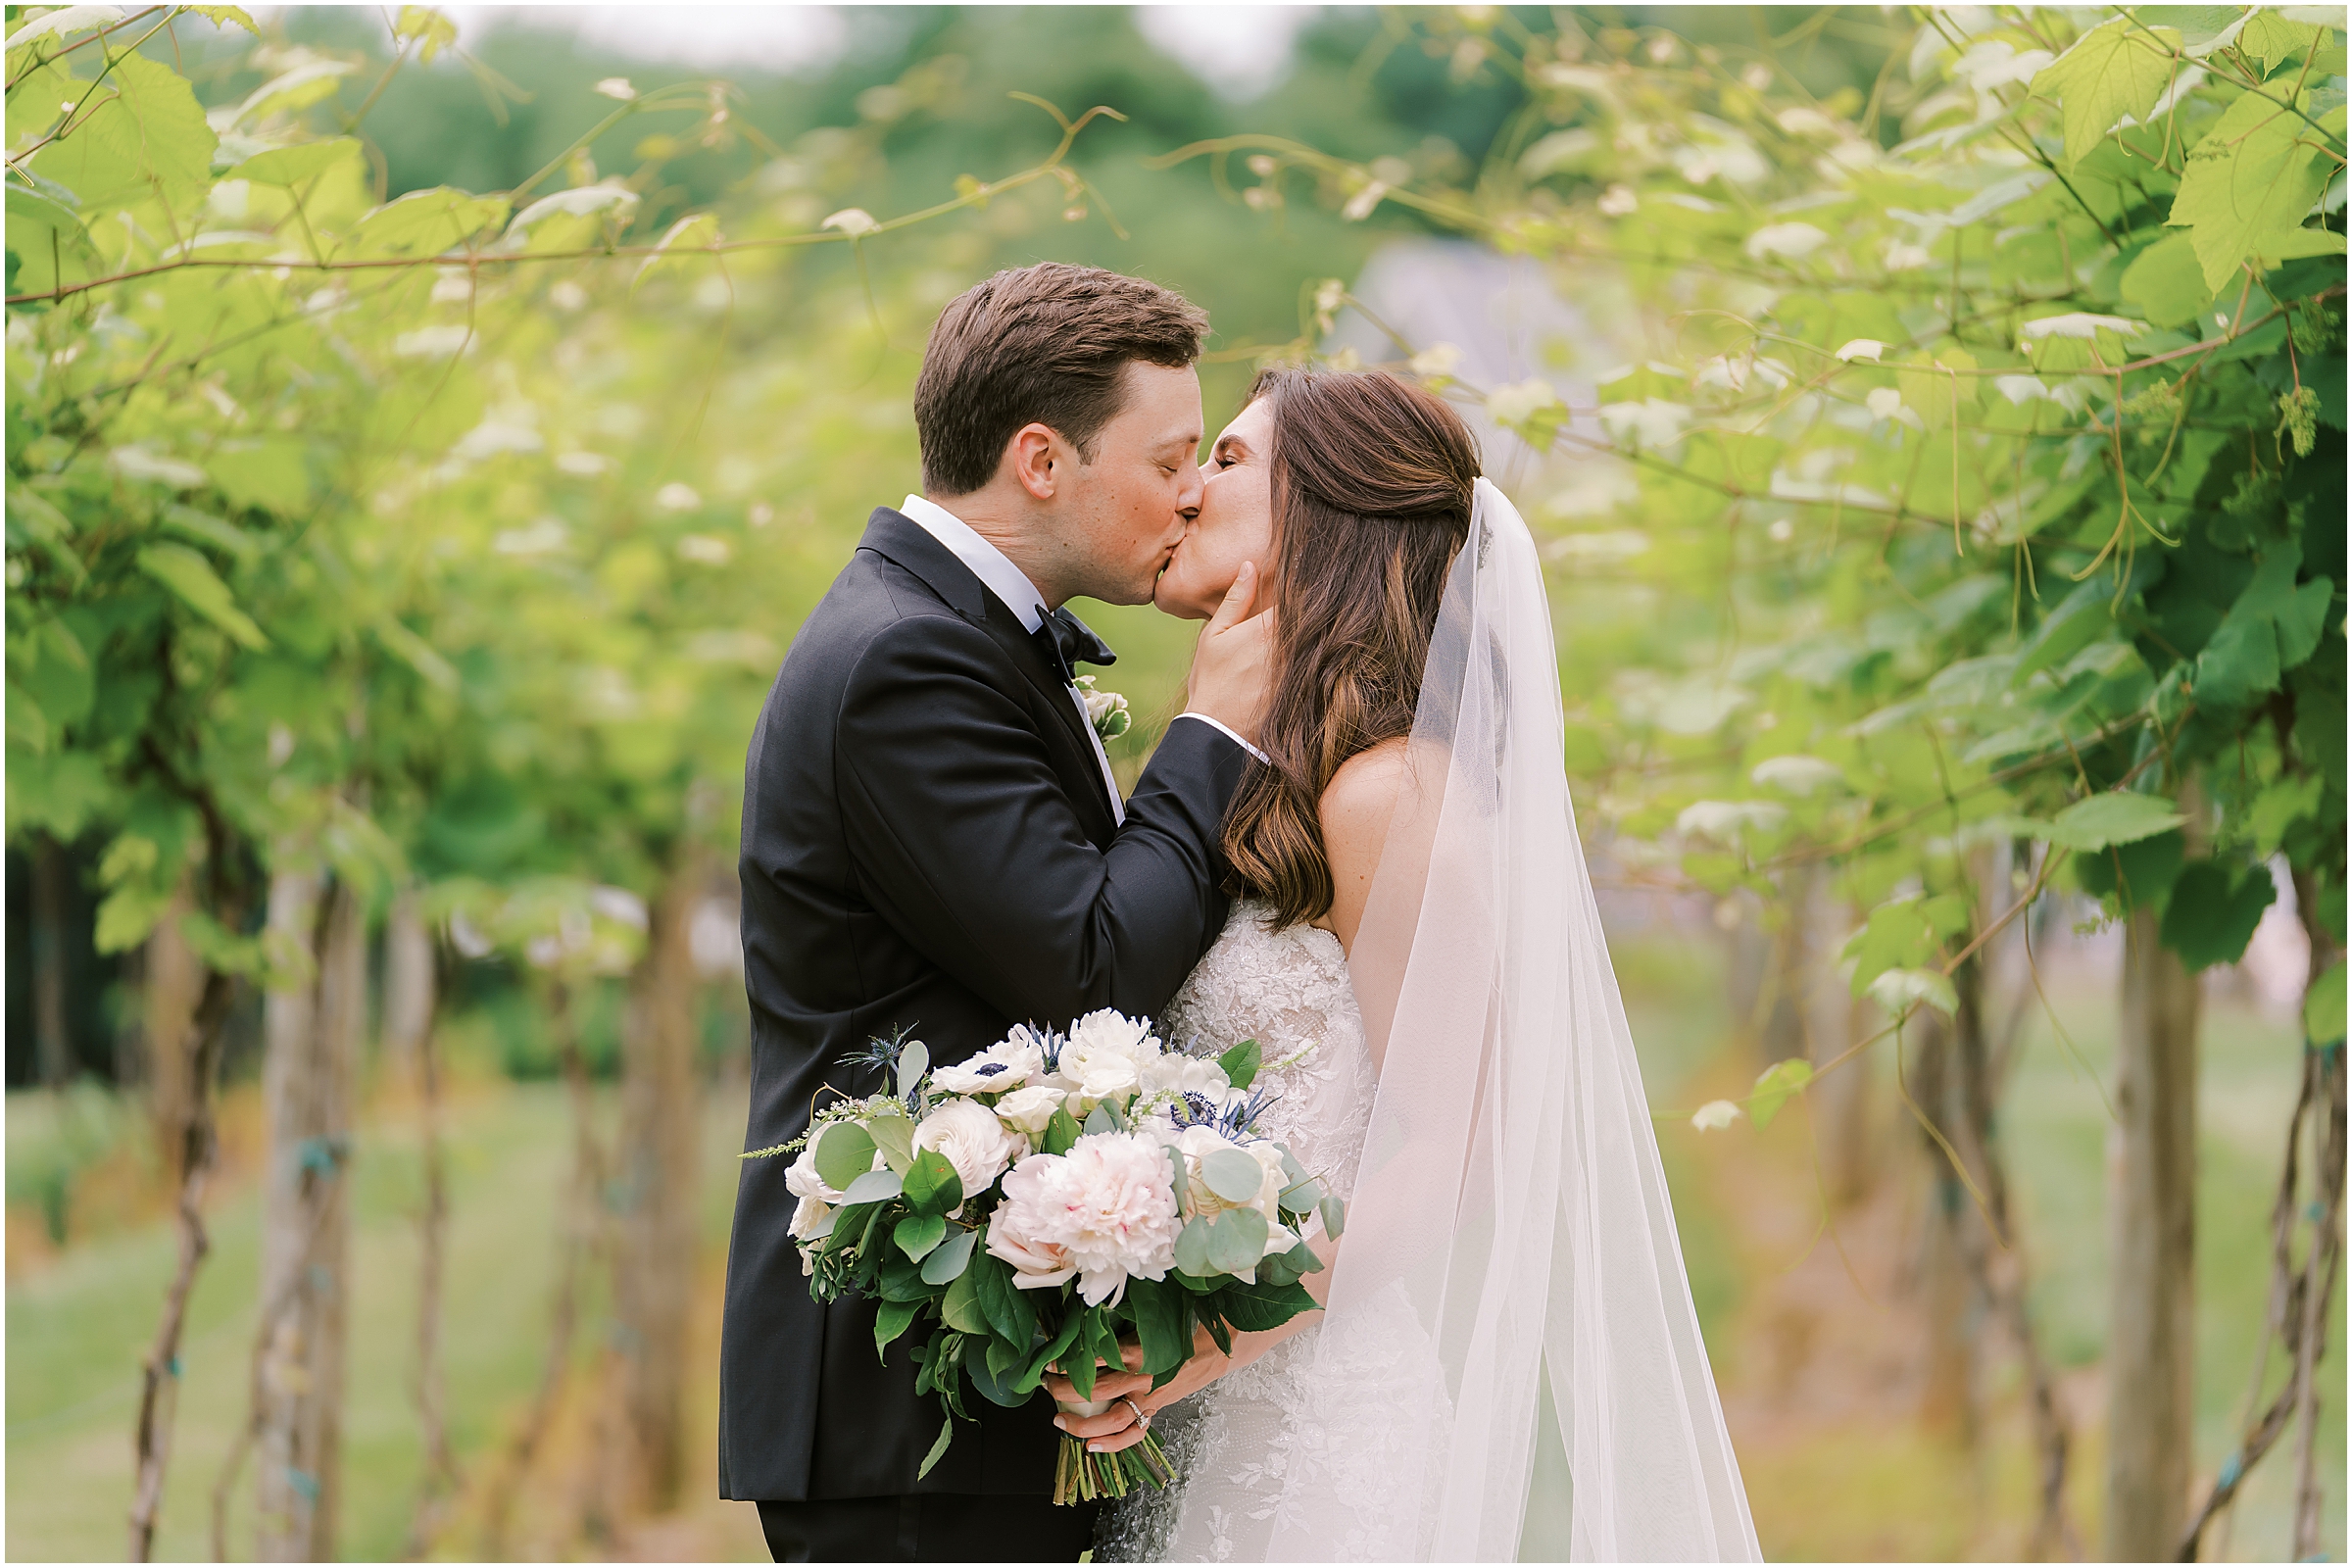 Bride and groom share a kiss at Fleetwood Farm Winery in Leesburg, VA